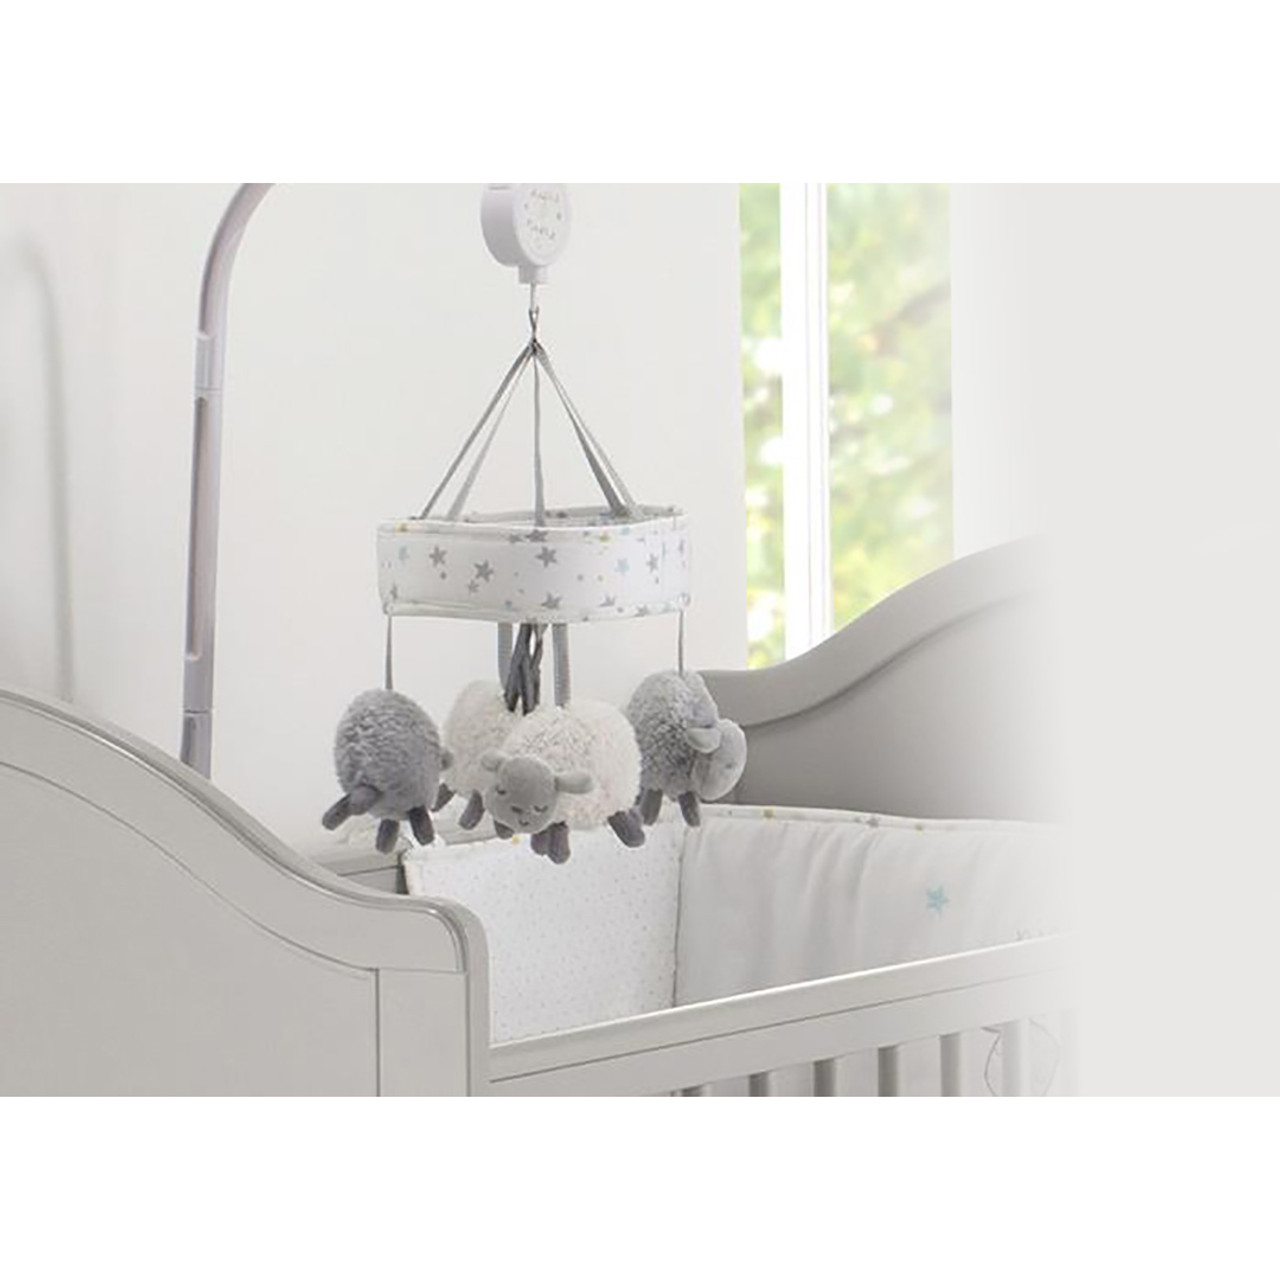 Silver Cloud Cot Mobile - Counting Sheep